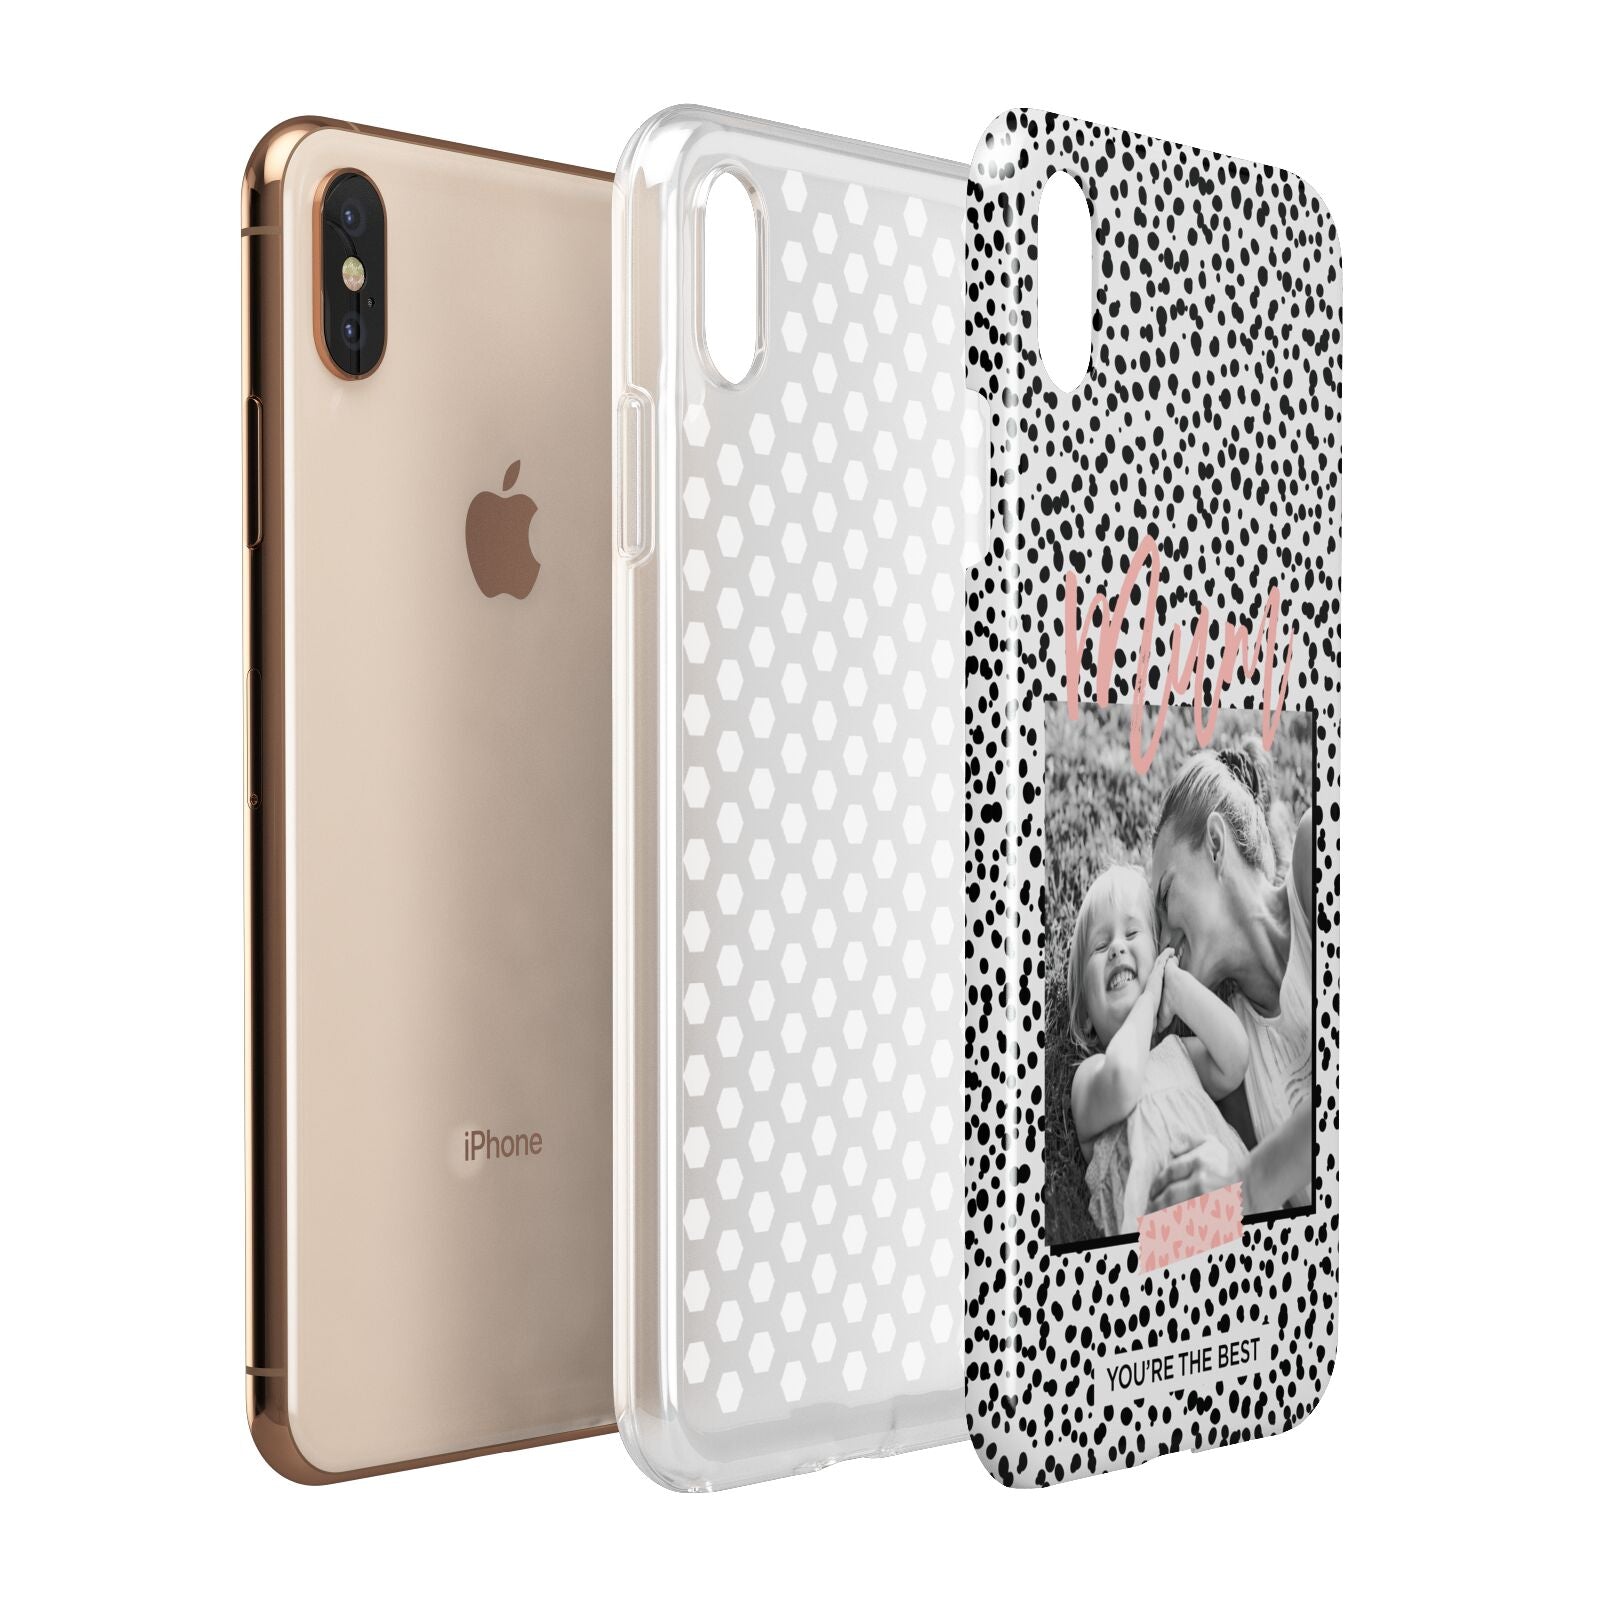 Polka Dot Mum Apple iPhone Xs Max 3D Tough Case Expanded View